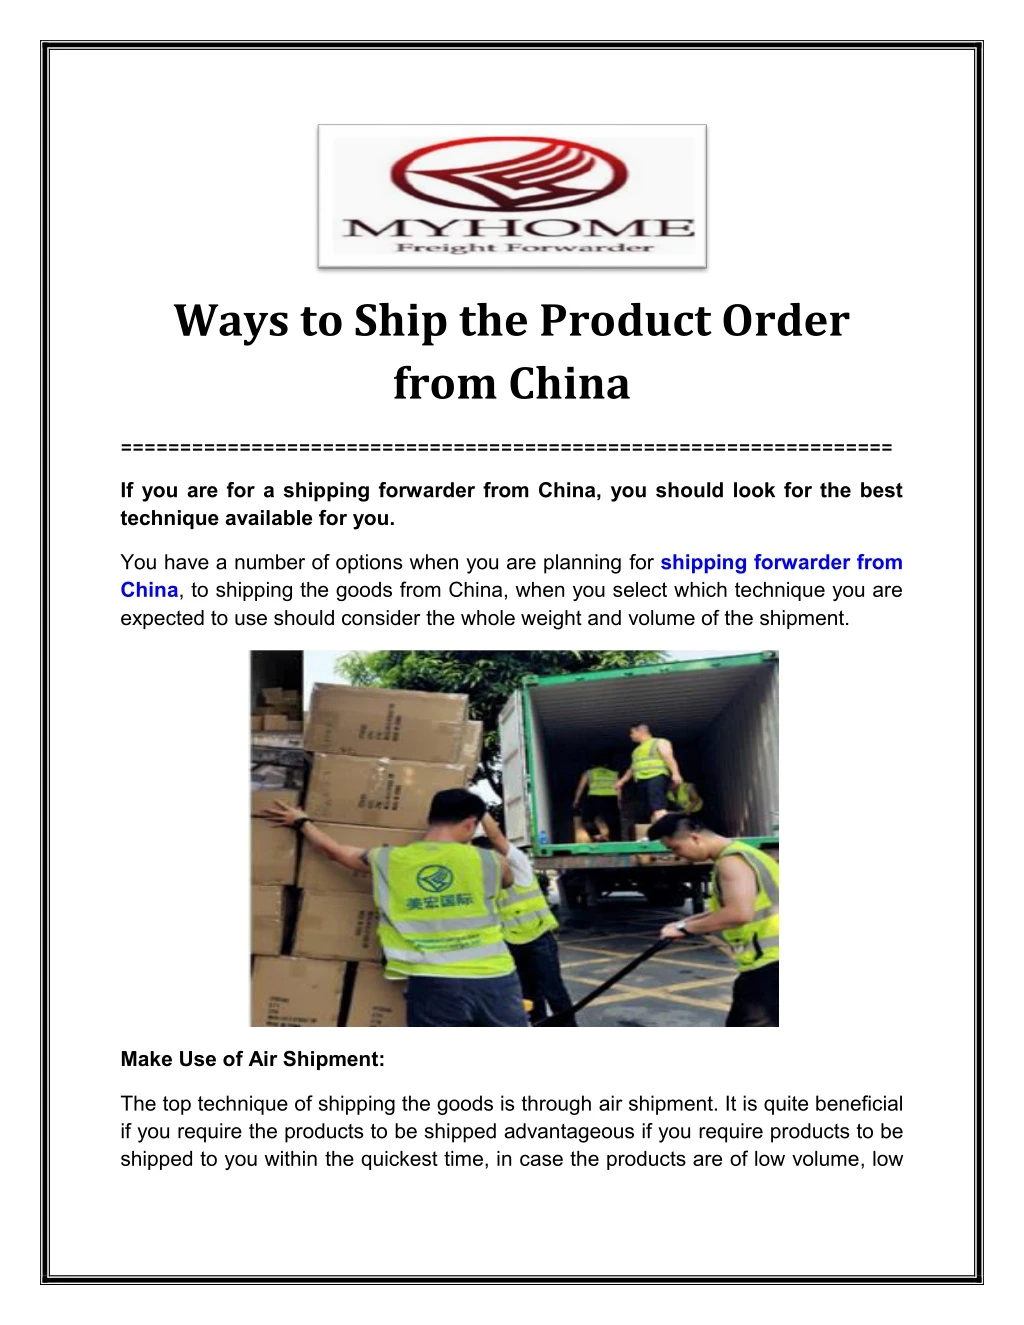 ways to ship the product order from china